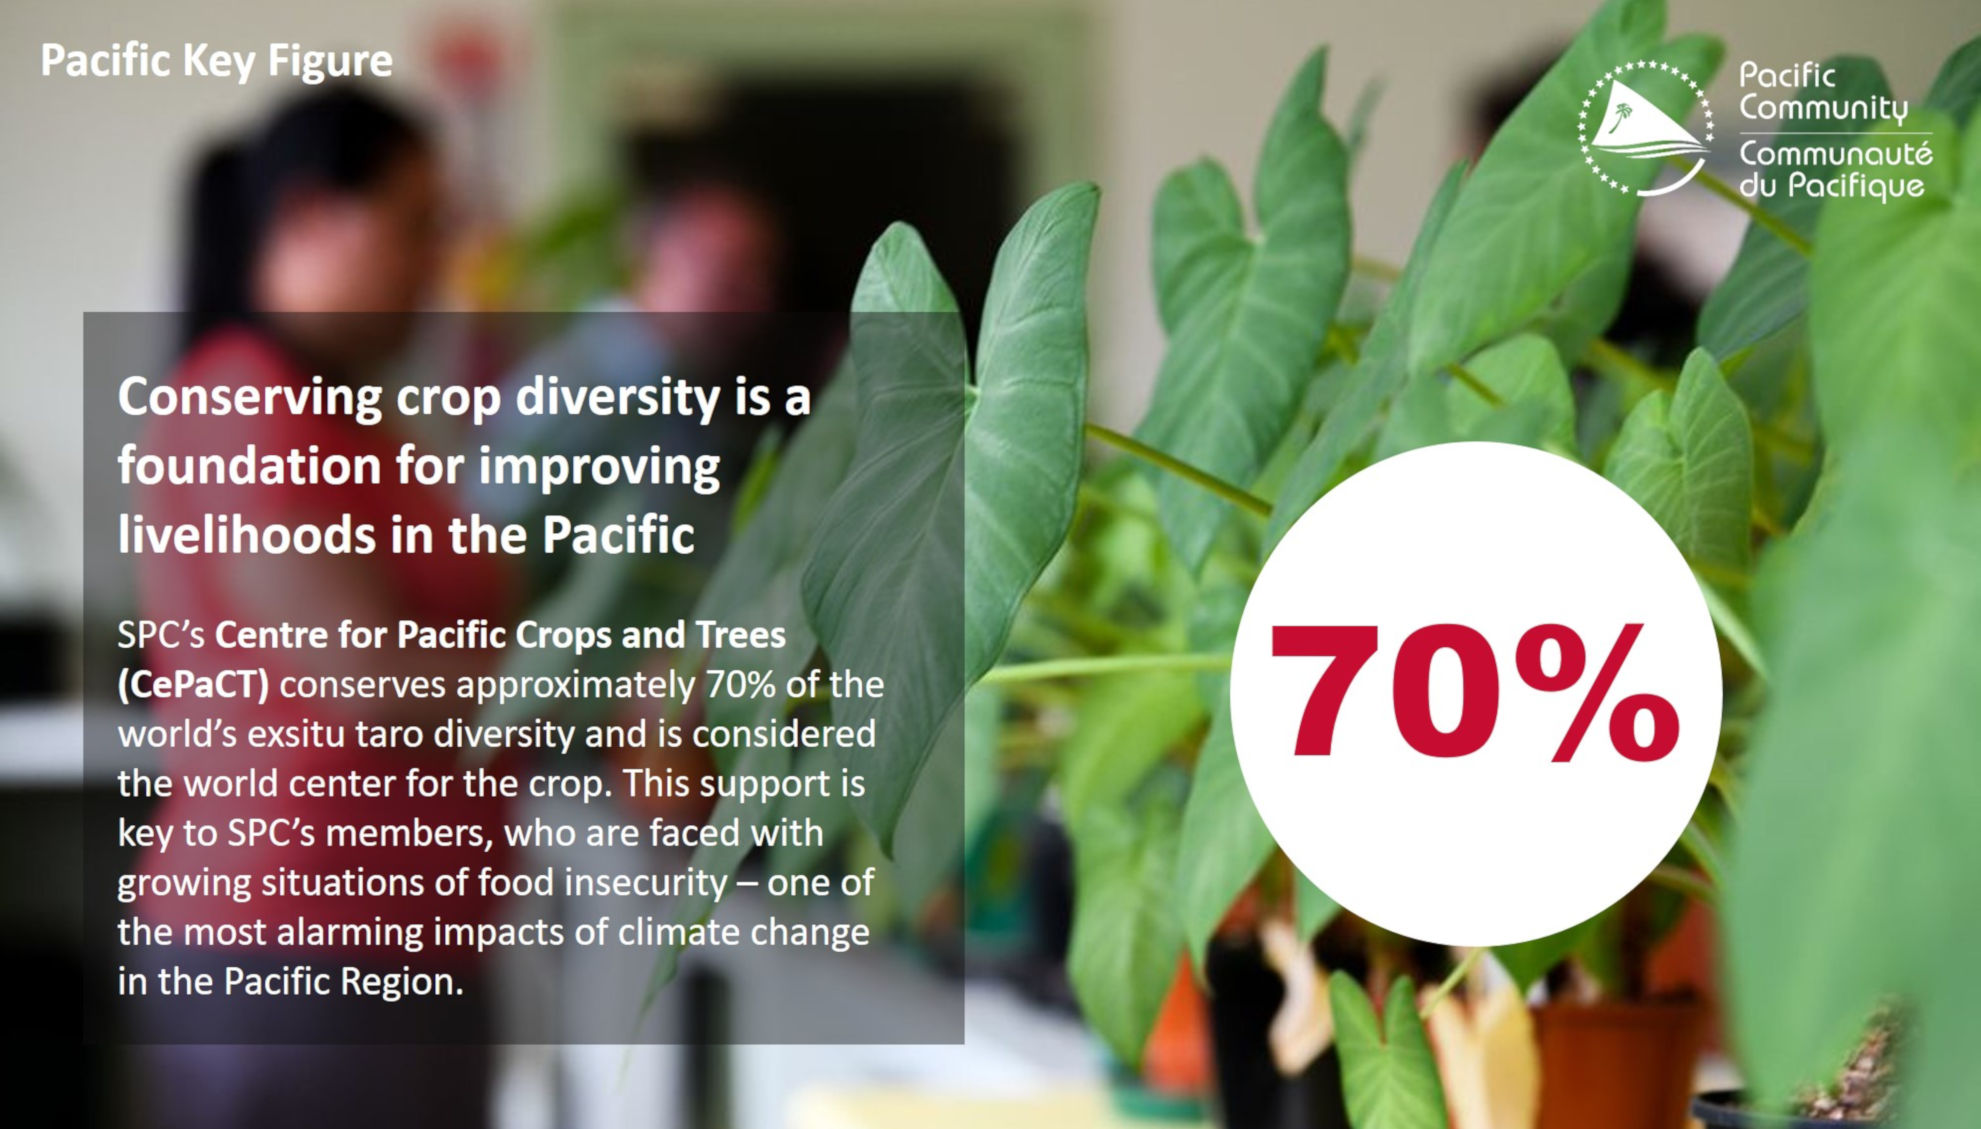 Conserving crop diversity is a foundation for improving livelihoods in the Pacific 